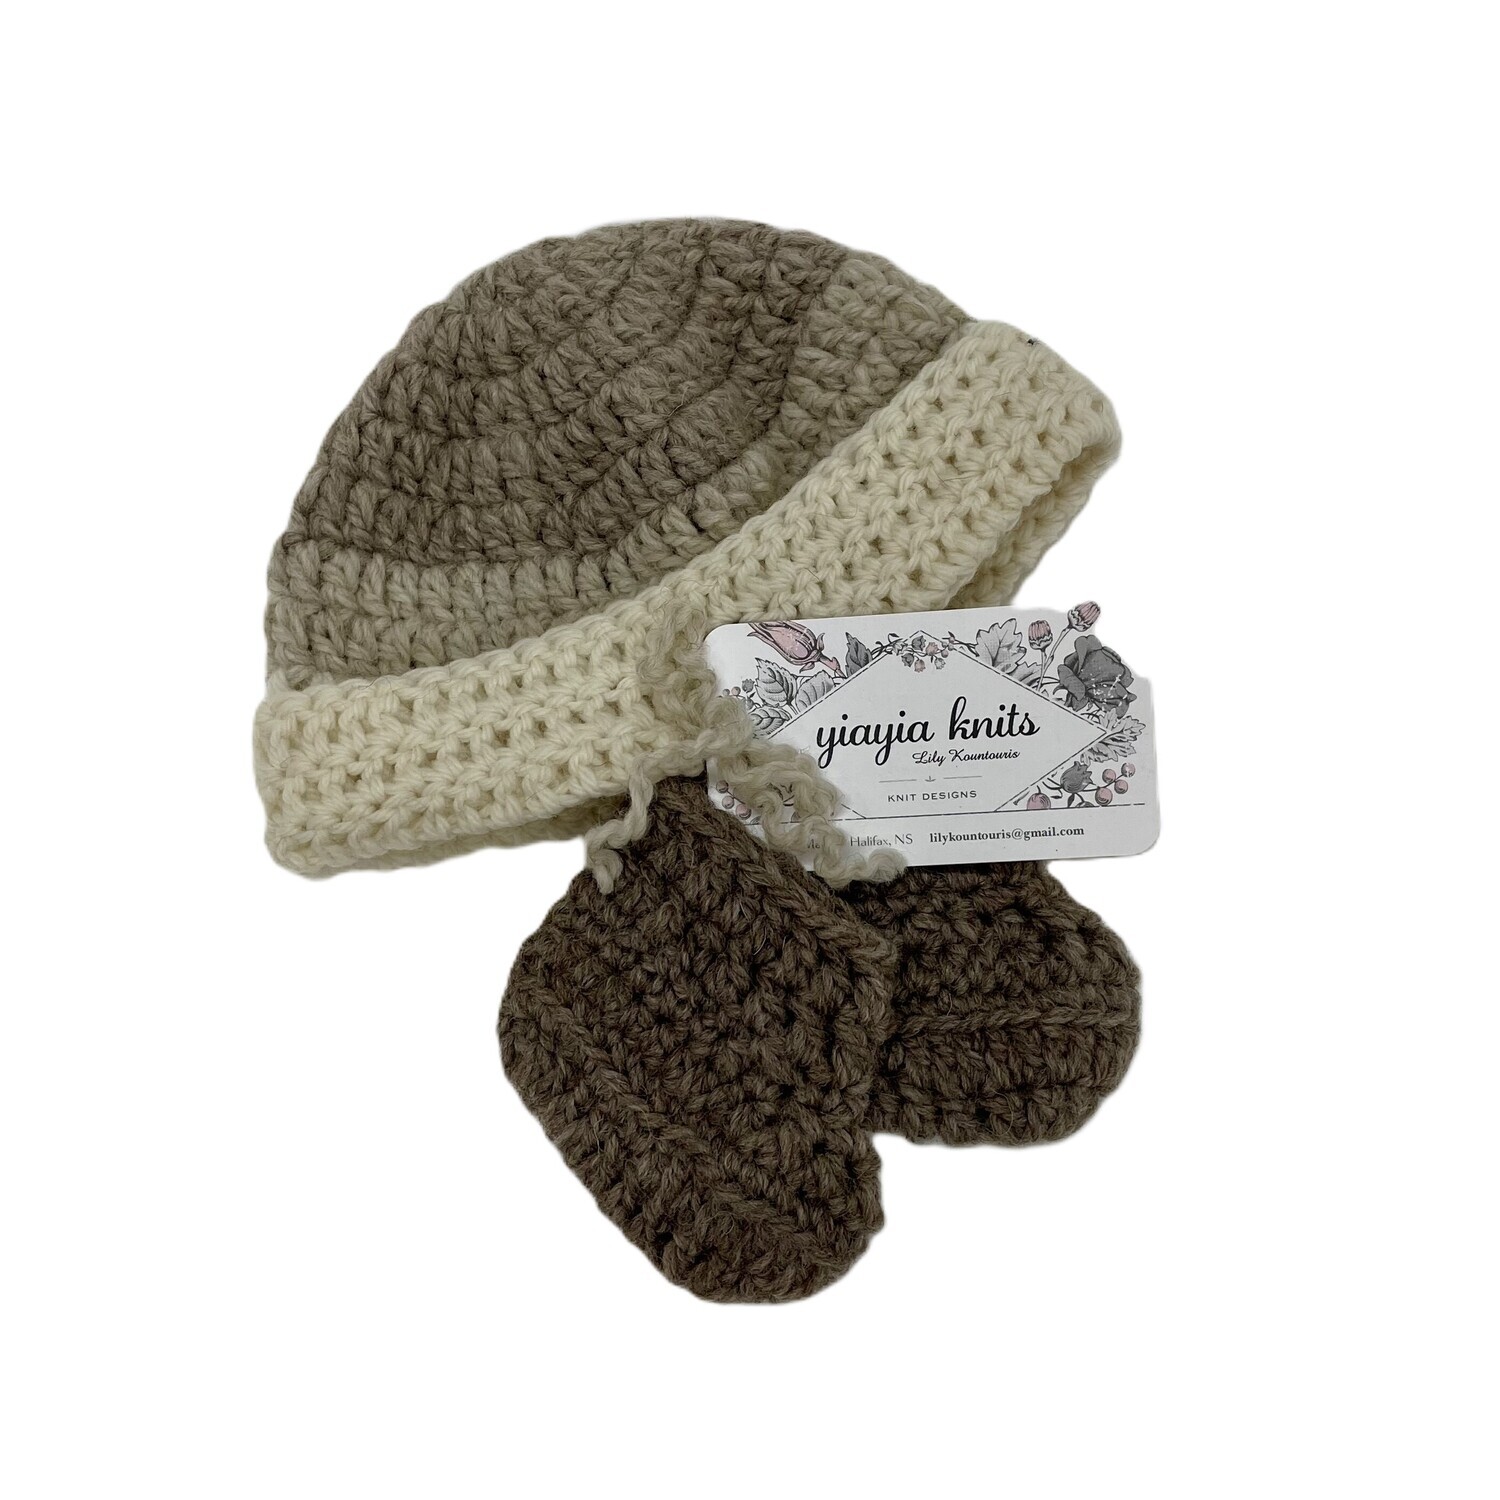 Newborn Toque and Bootie Set- Yiayia Knits 